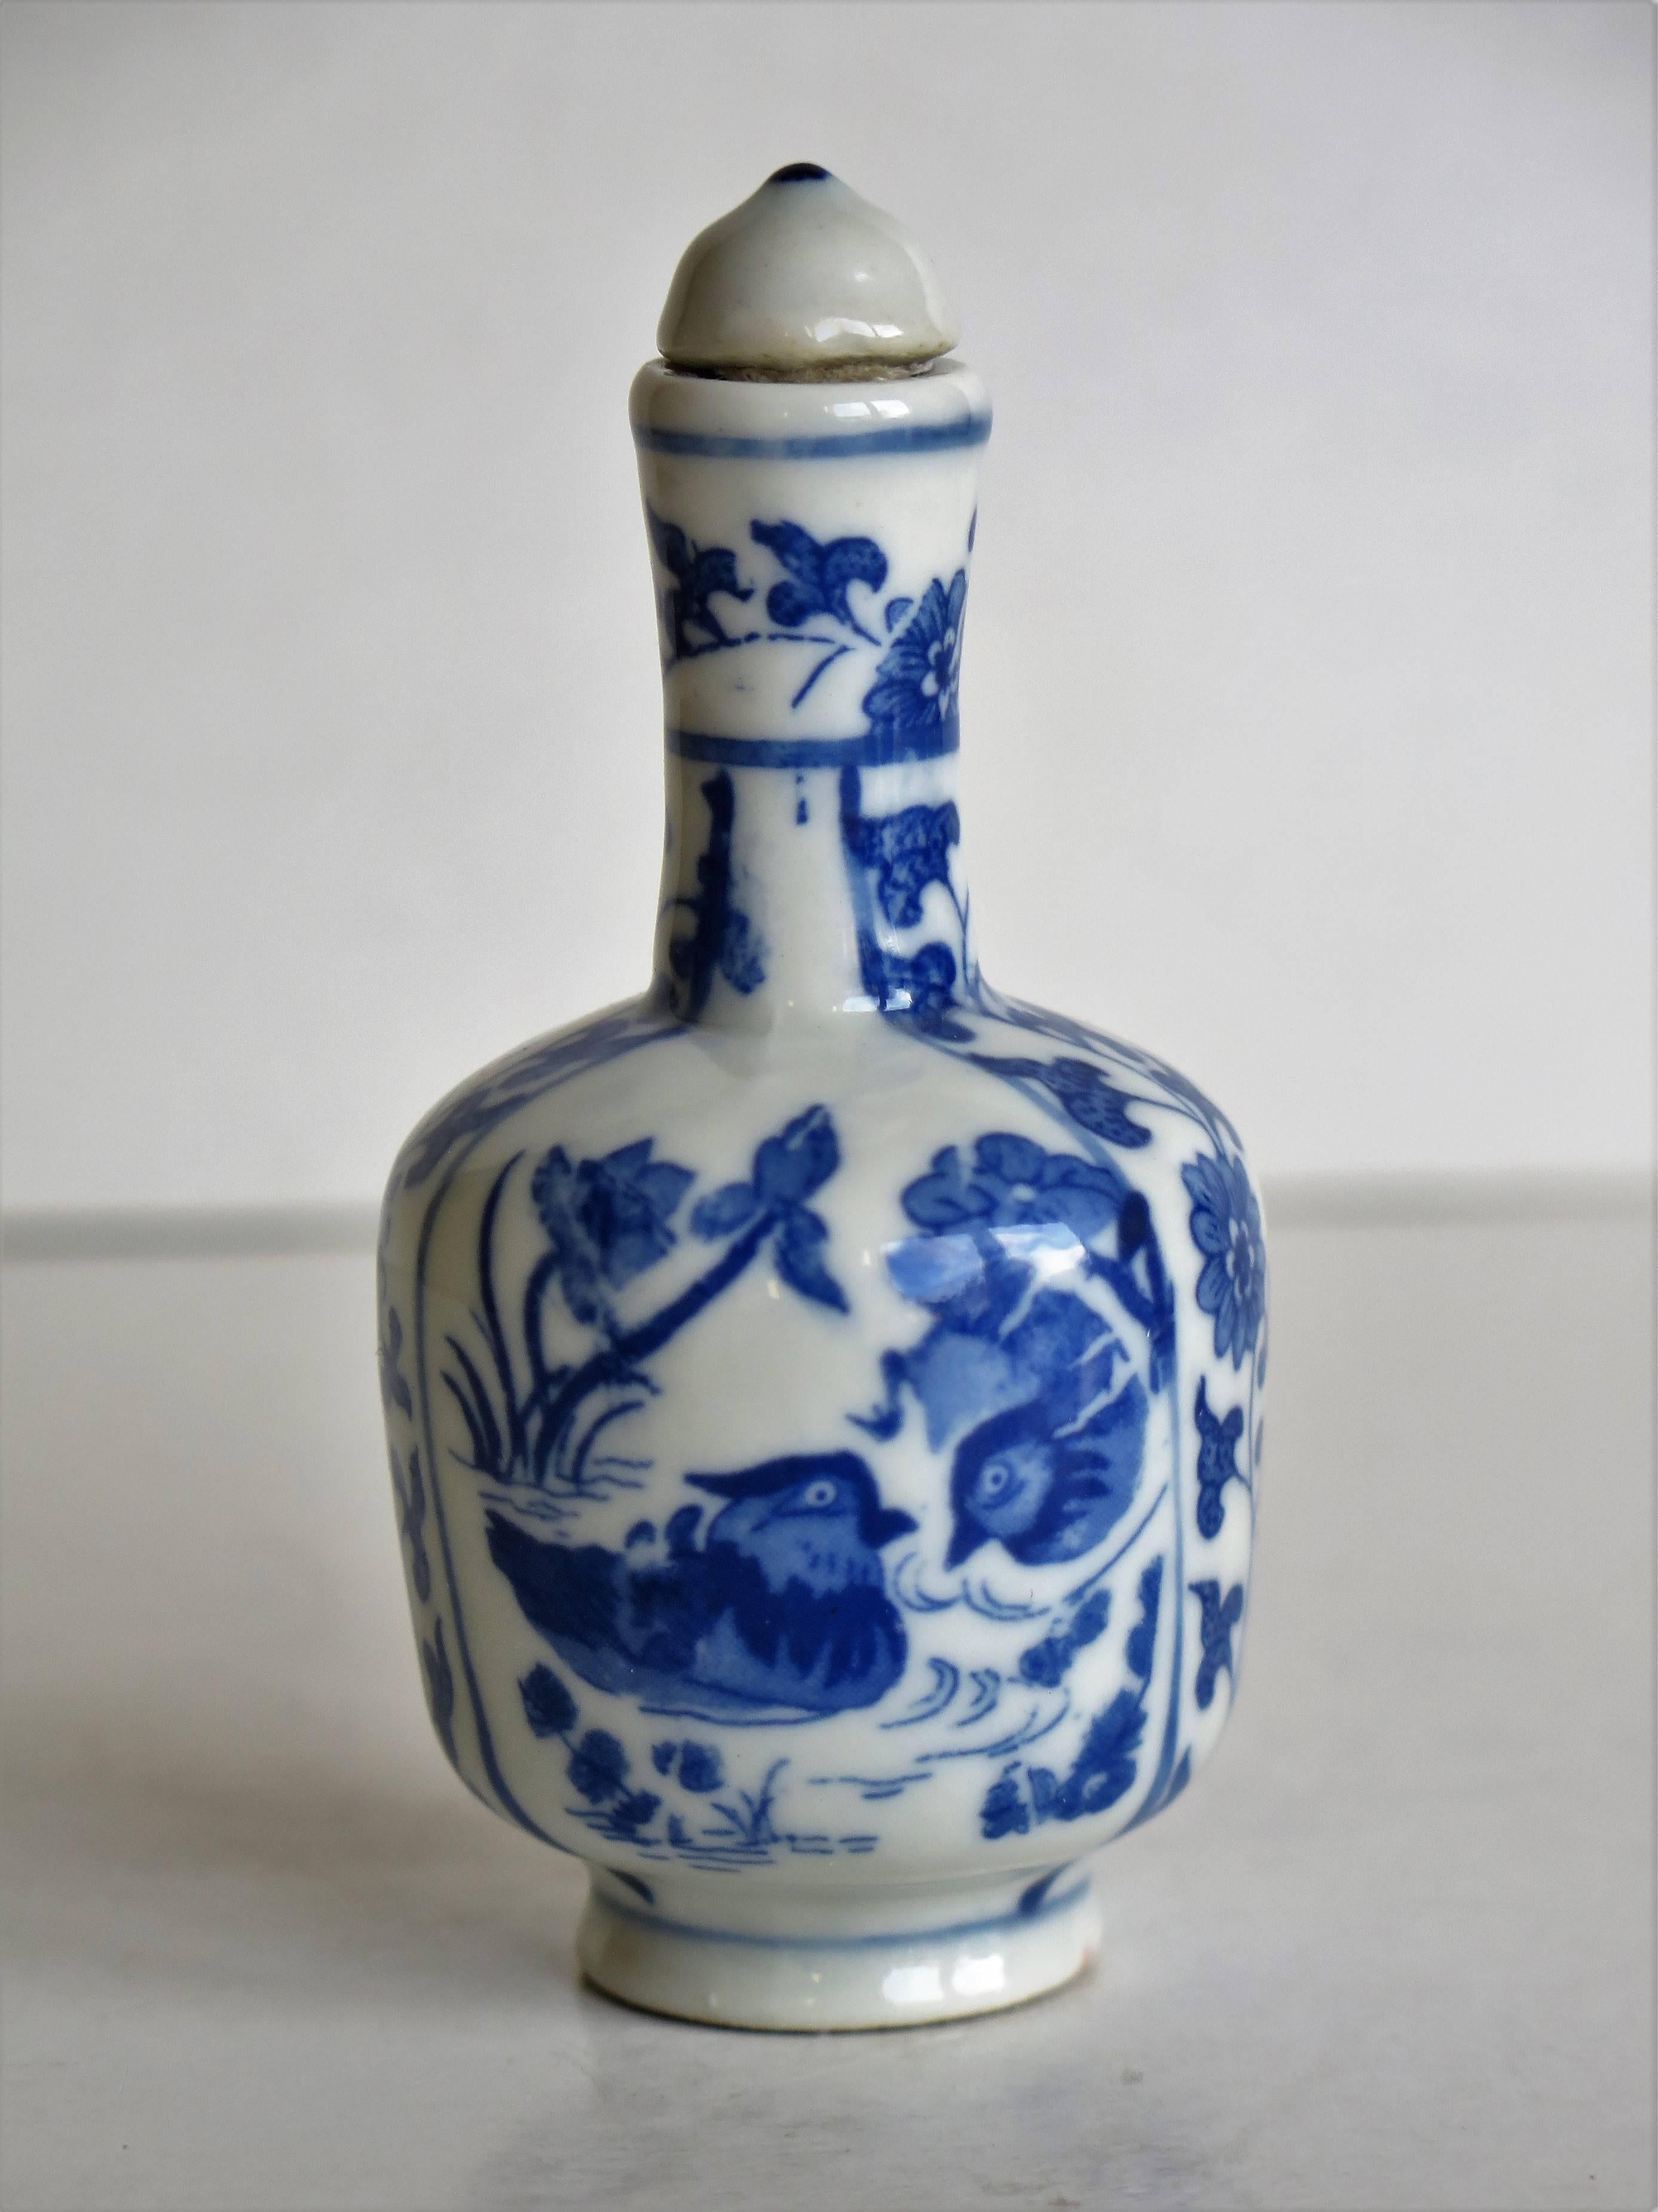 Qing Chinese Porcelain Snuff Bottle Blue and White Mandarin Ducks signed, circa 1930